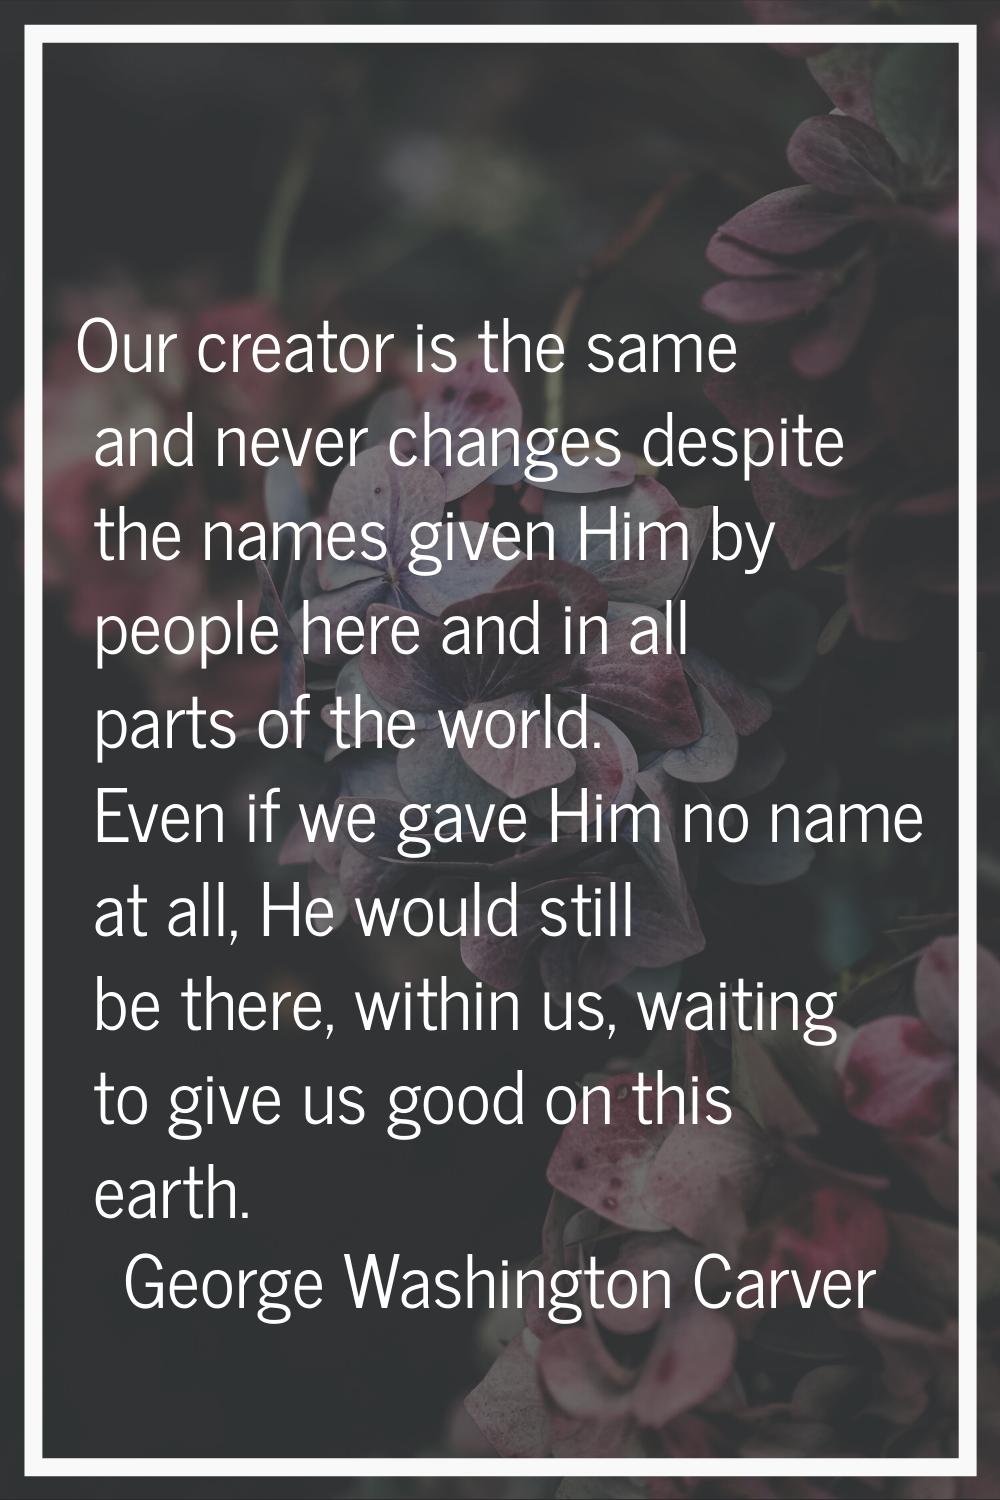 Our creator is the same and never changes despite the names given Him by people here and in all par